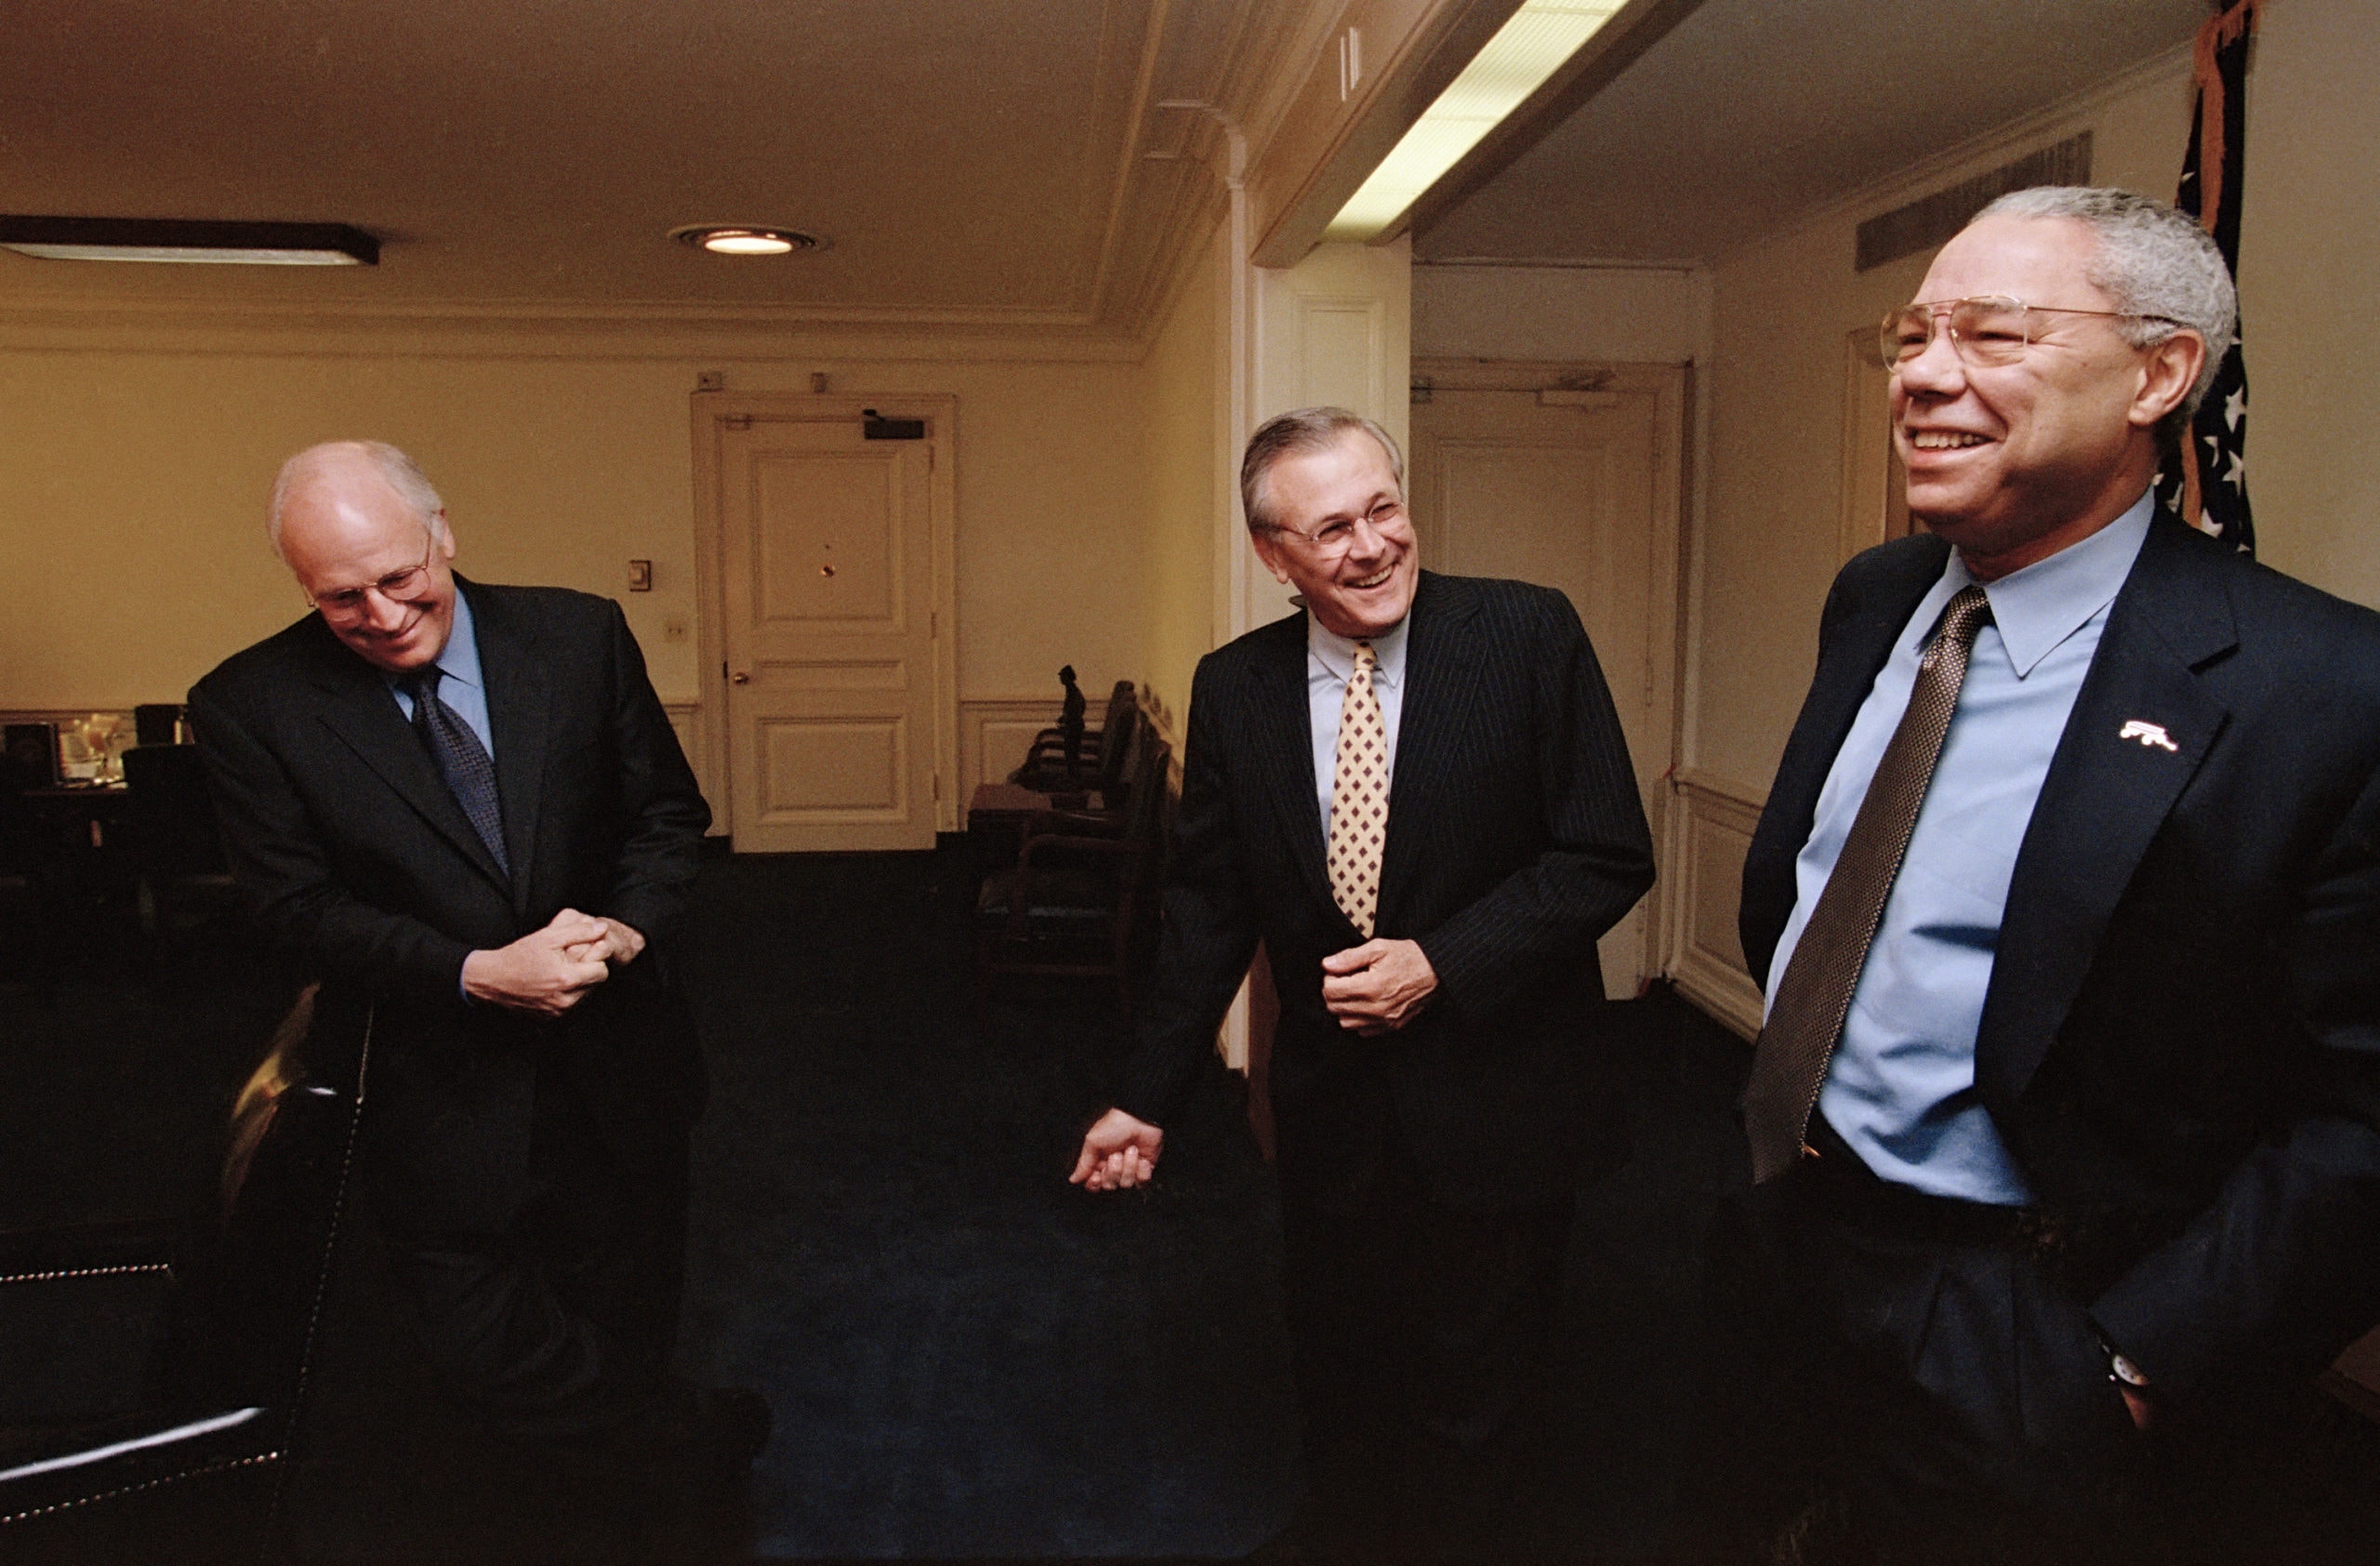 WASHINGTON - APRIL: (L-R) Vice President Dick Cheney, Secretary of Defense Donald Rumsfeld and Secretary of State Colin Powell in Rumsfeld's Pentagon office April 2001 in Washington, D.C. (Photo by David Hume Kennerly/Getty Images)